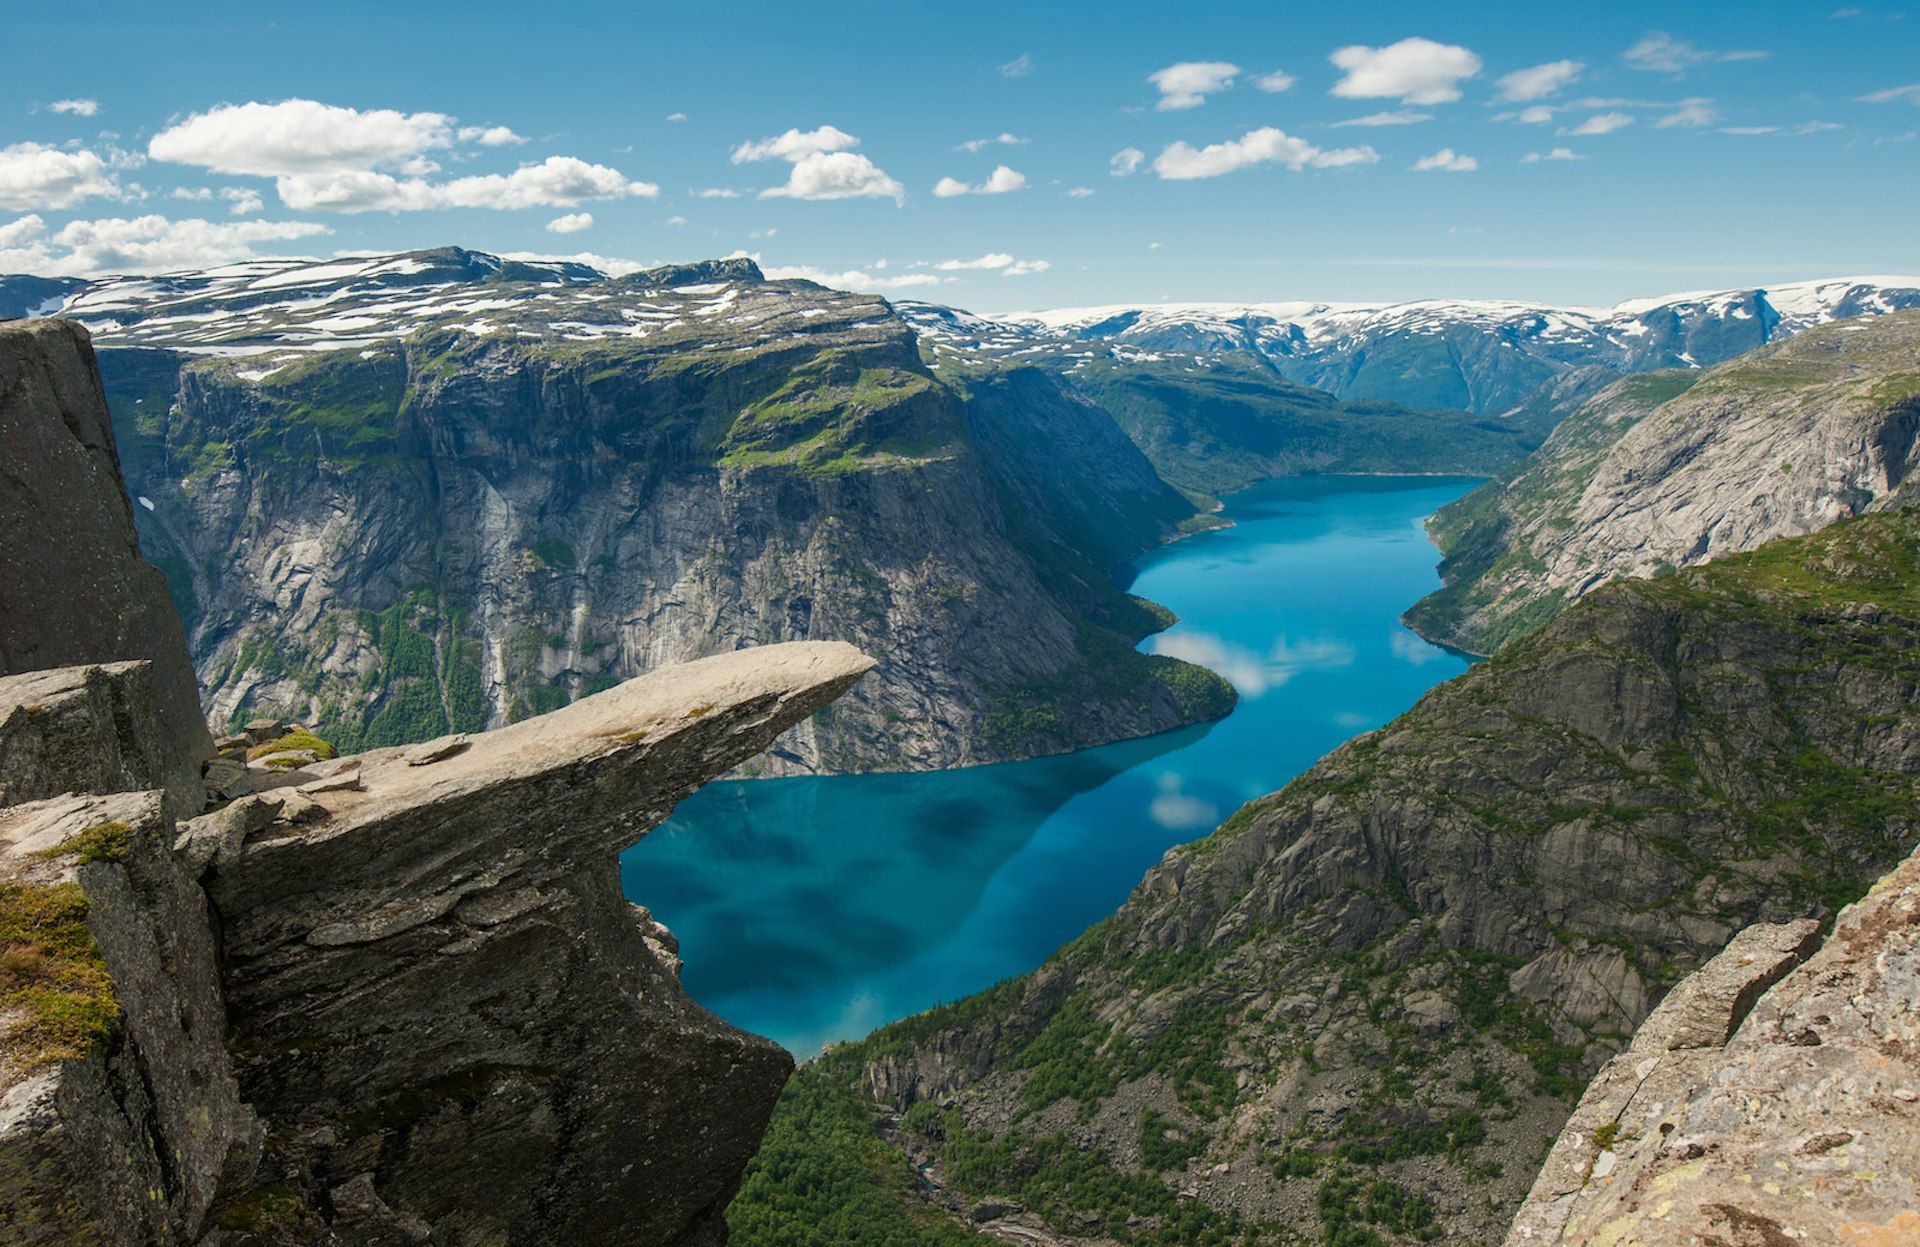 Trolltunga, a rocky ledge that hangs out over Lake Ringedalsvatnet, Norway © javaman3 / Getty Images